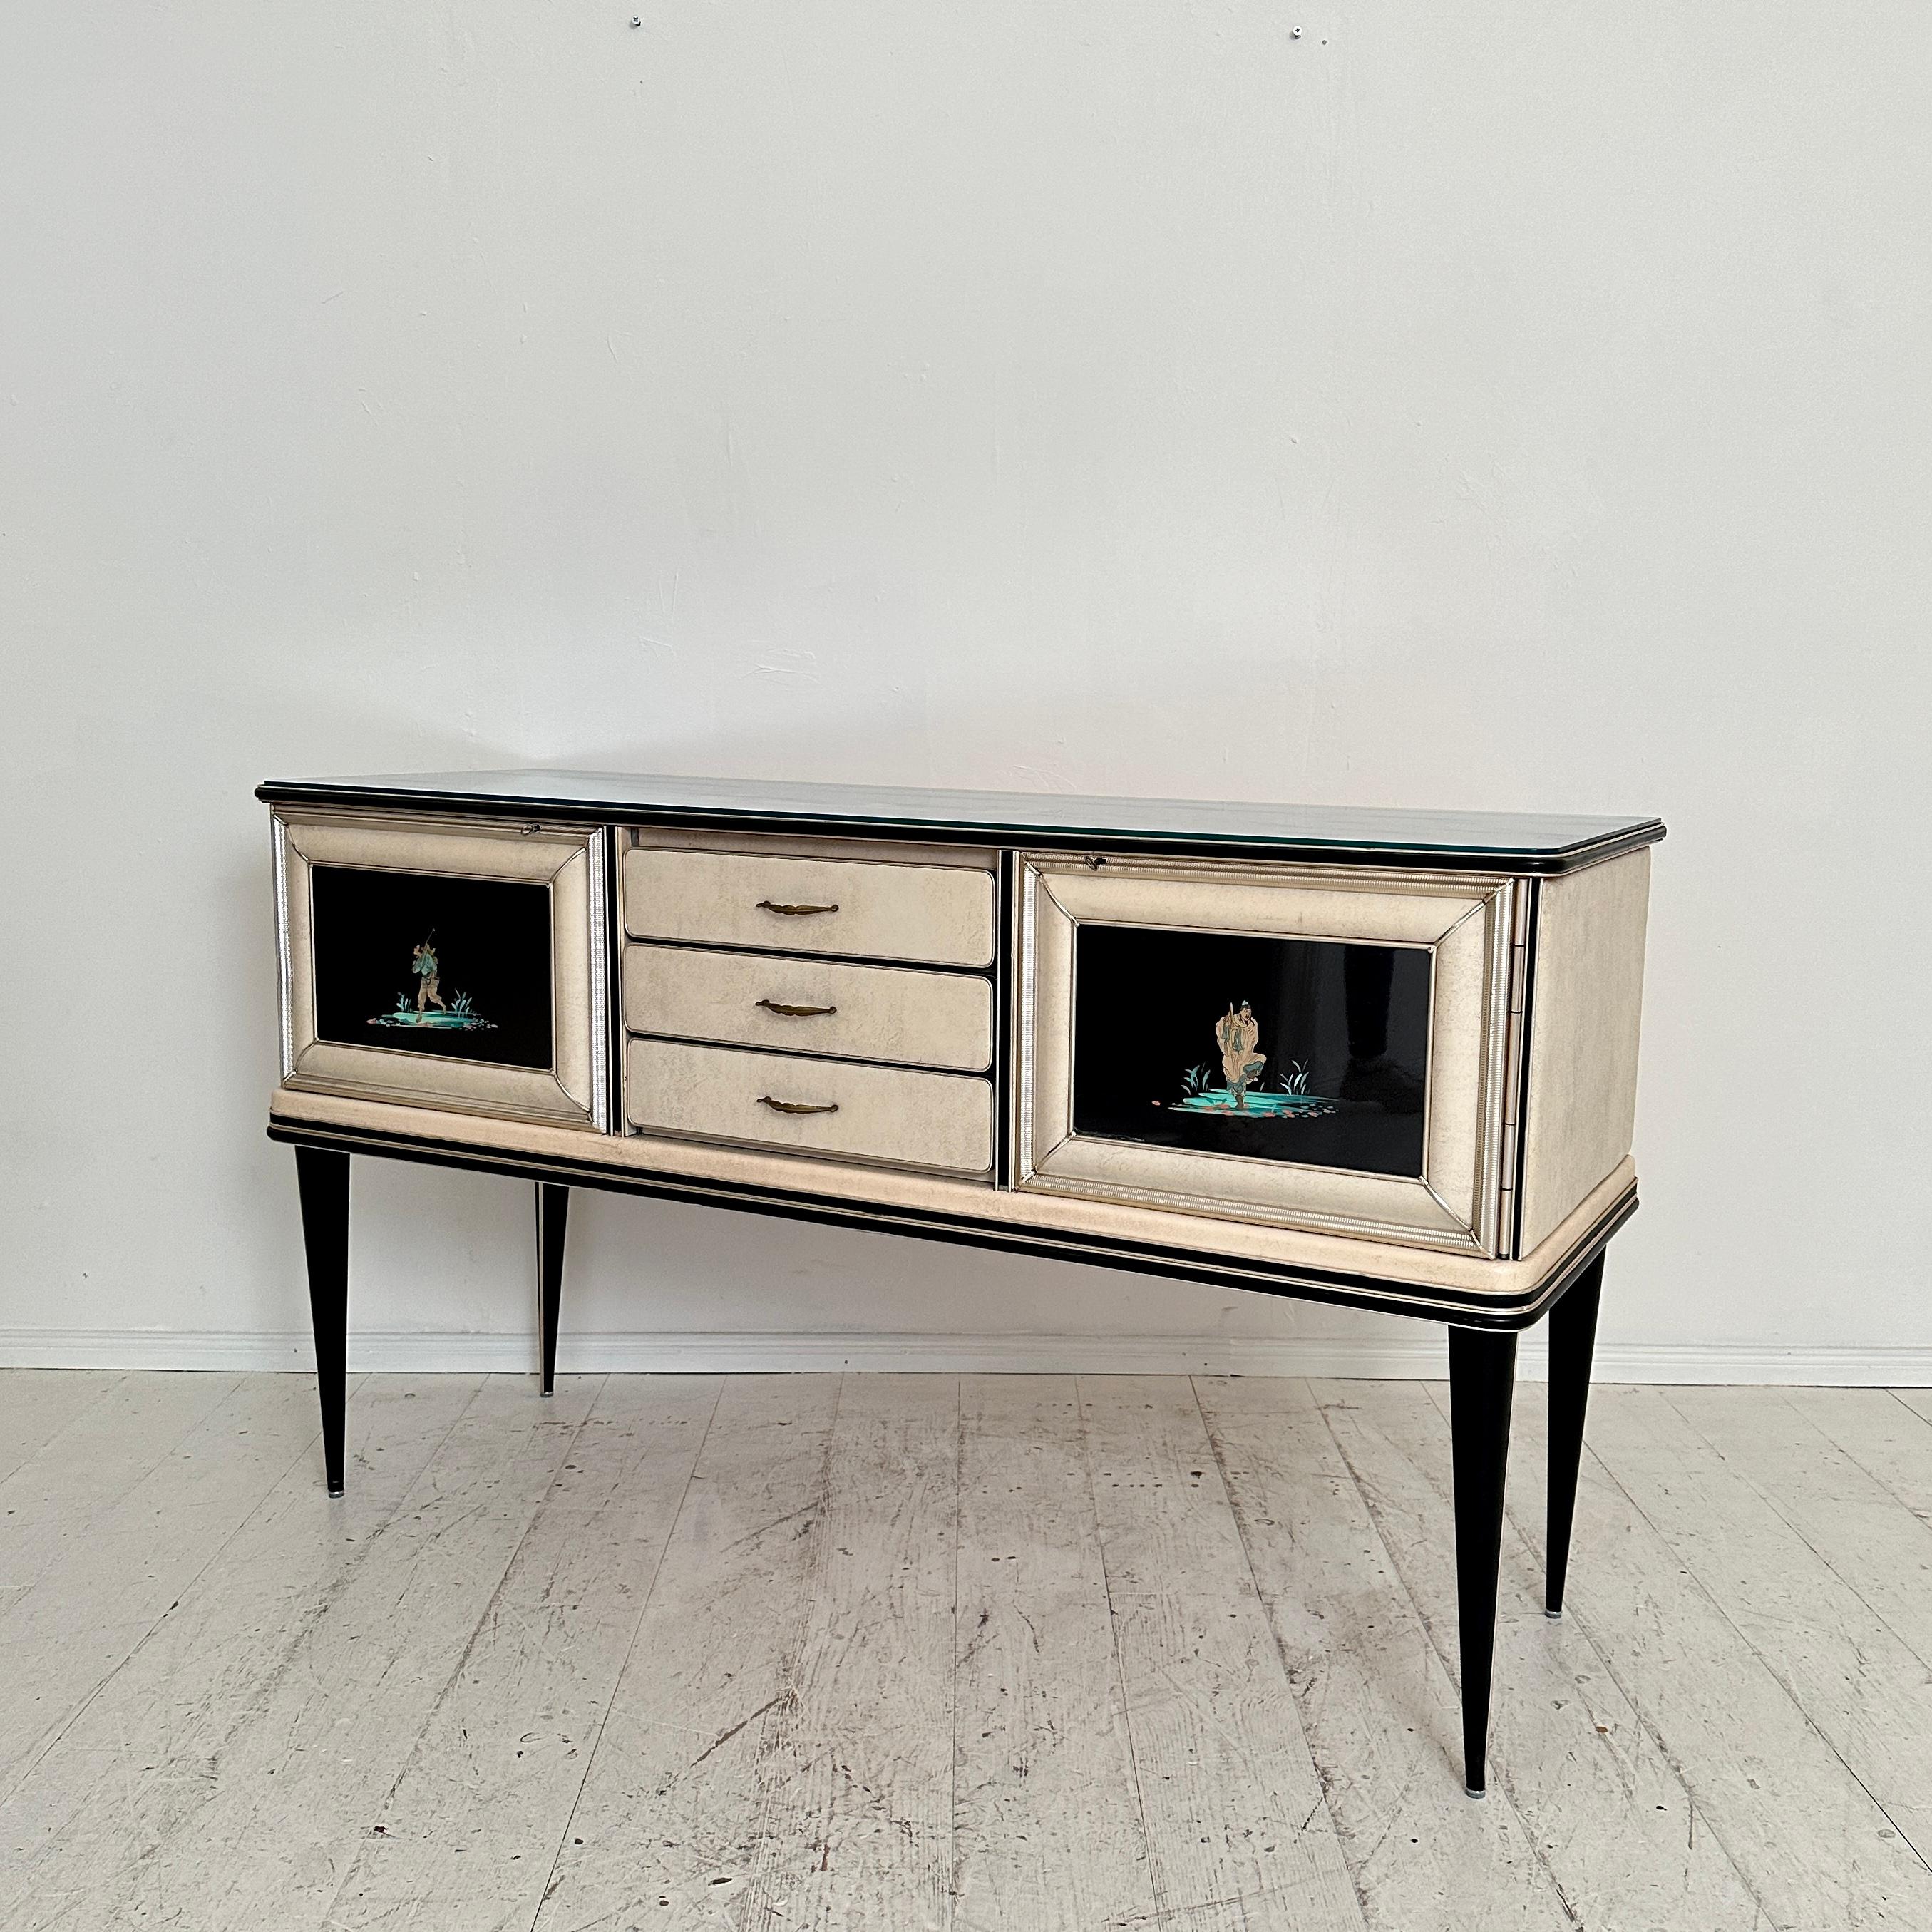 Mid-Century Chinoserie Sideboard by Umberto Mascagni for Harrods London, 1953 For Sale 7